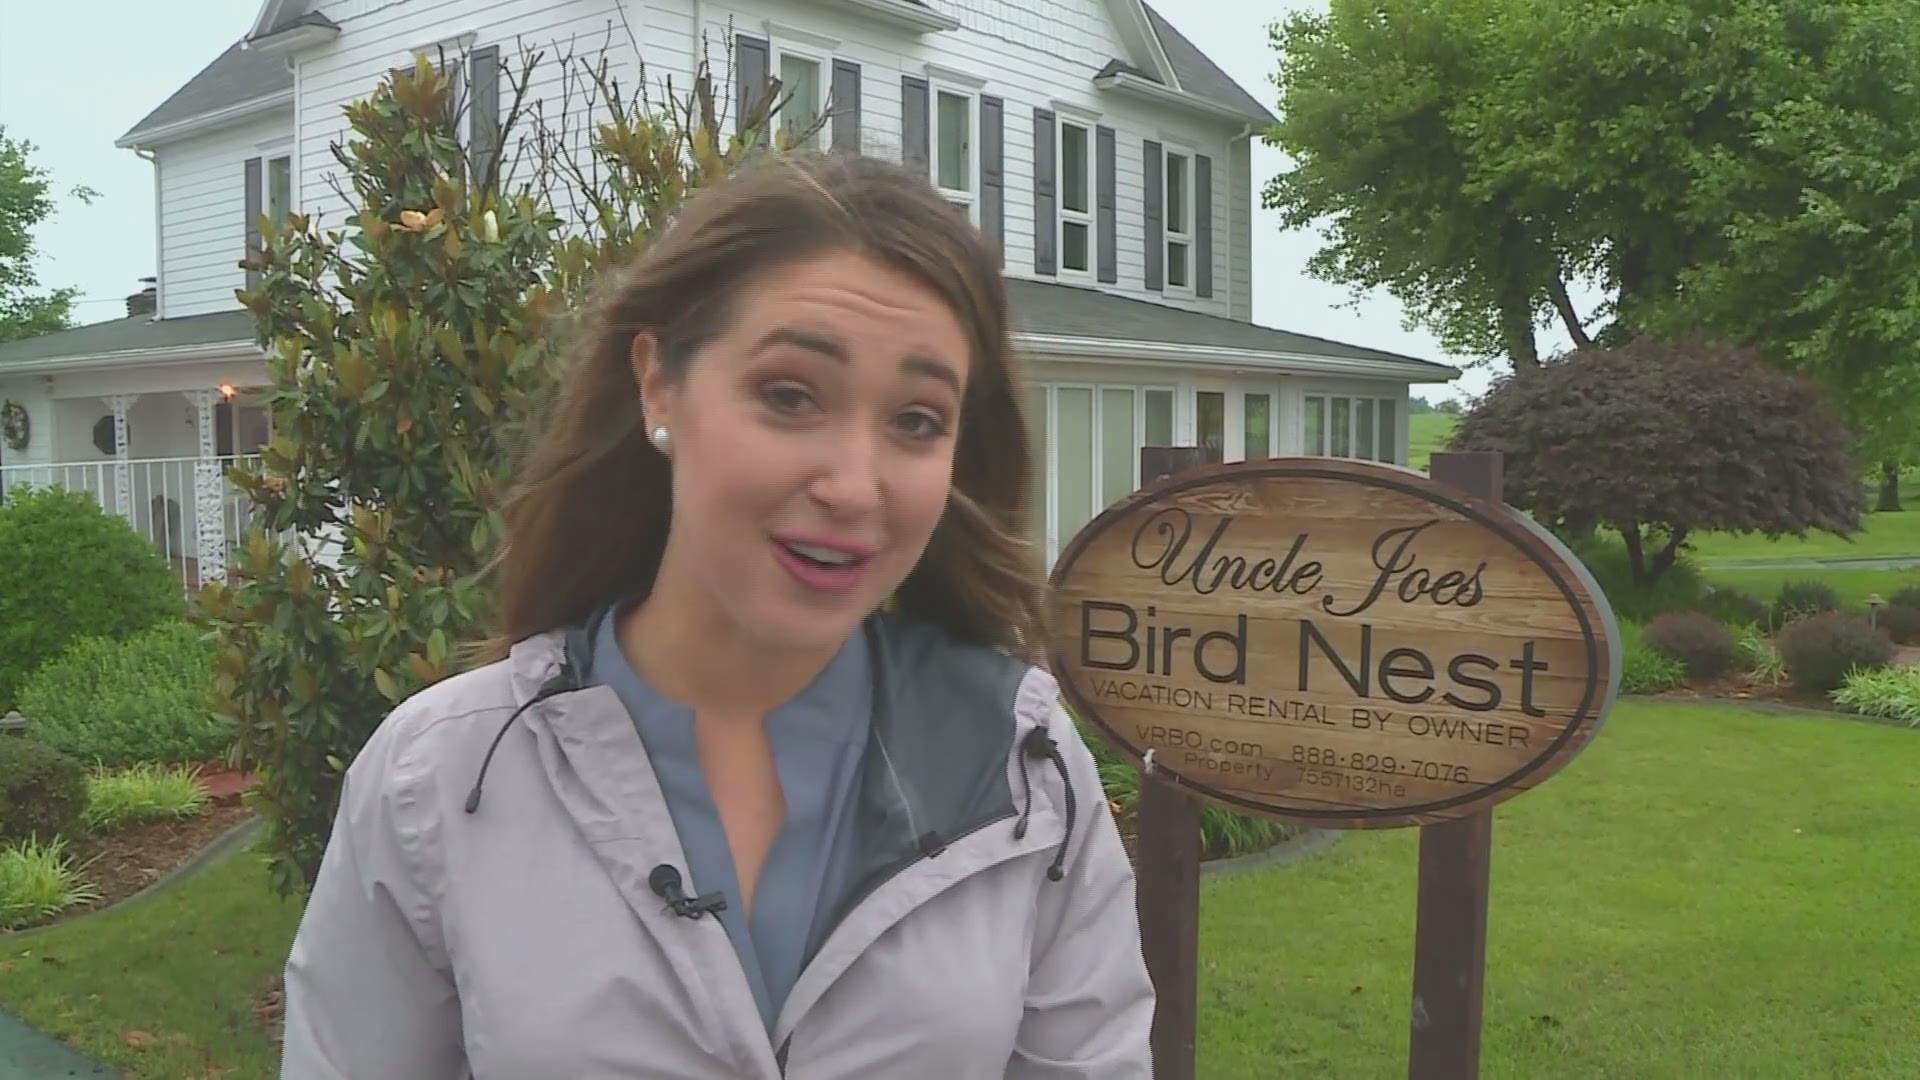 Family and history goes hand in hand at Joe Huber's Family Farm & Restaurant. The family is now allowing people to come in and share a part of that history with Uncle Joe's Bird Nest.